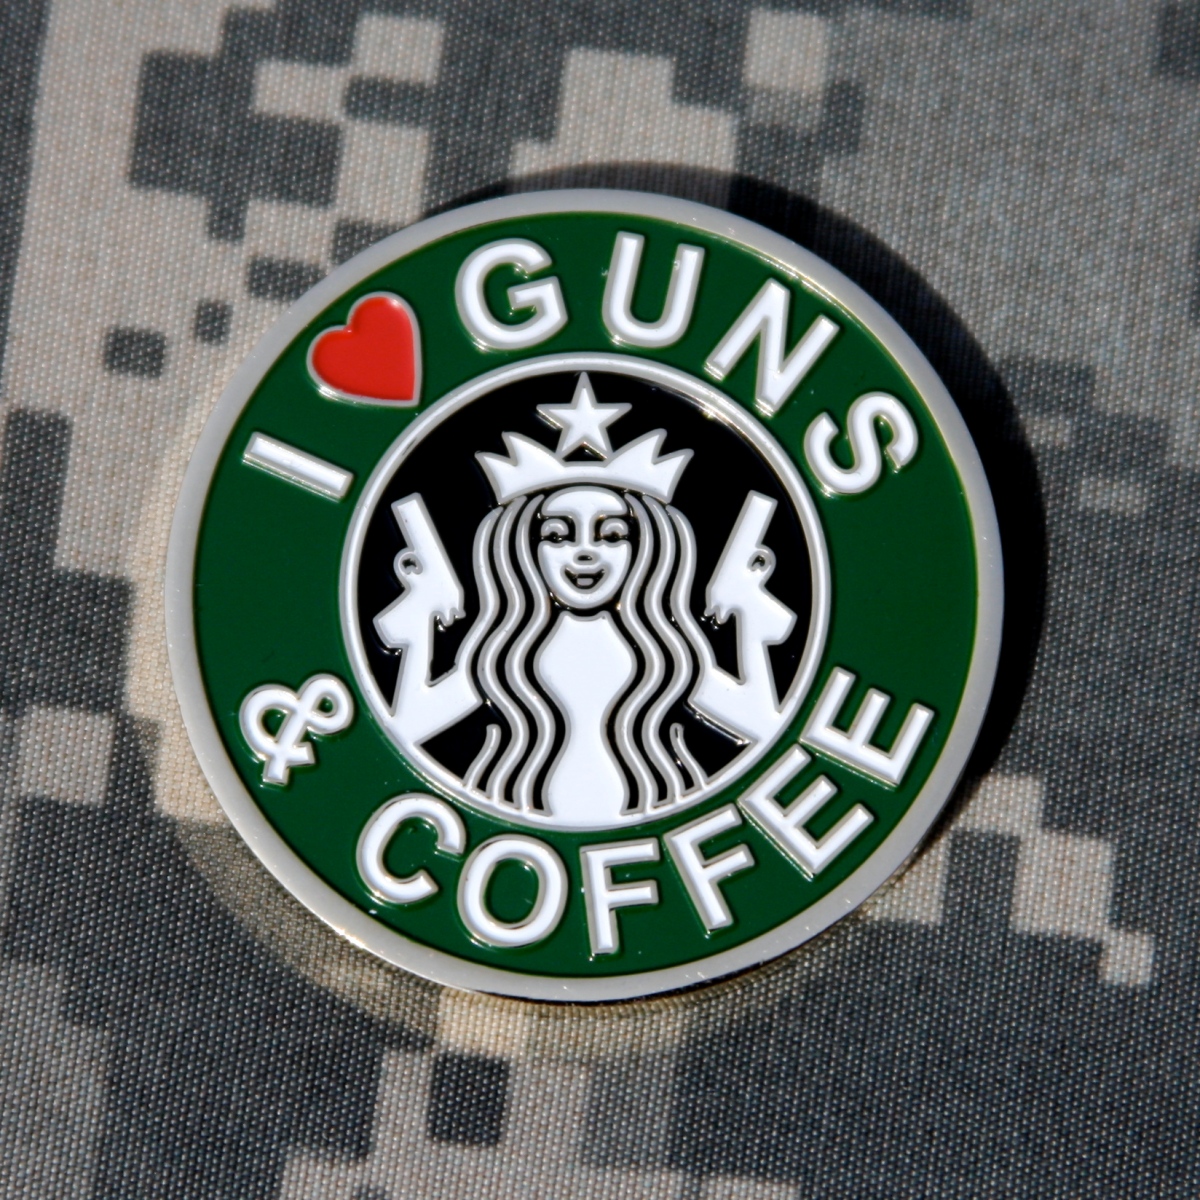 “I Love Guns & Coffee” Morale Challenge Coin | The Commander's Challenge